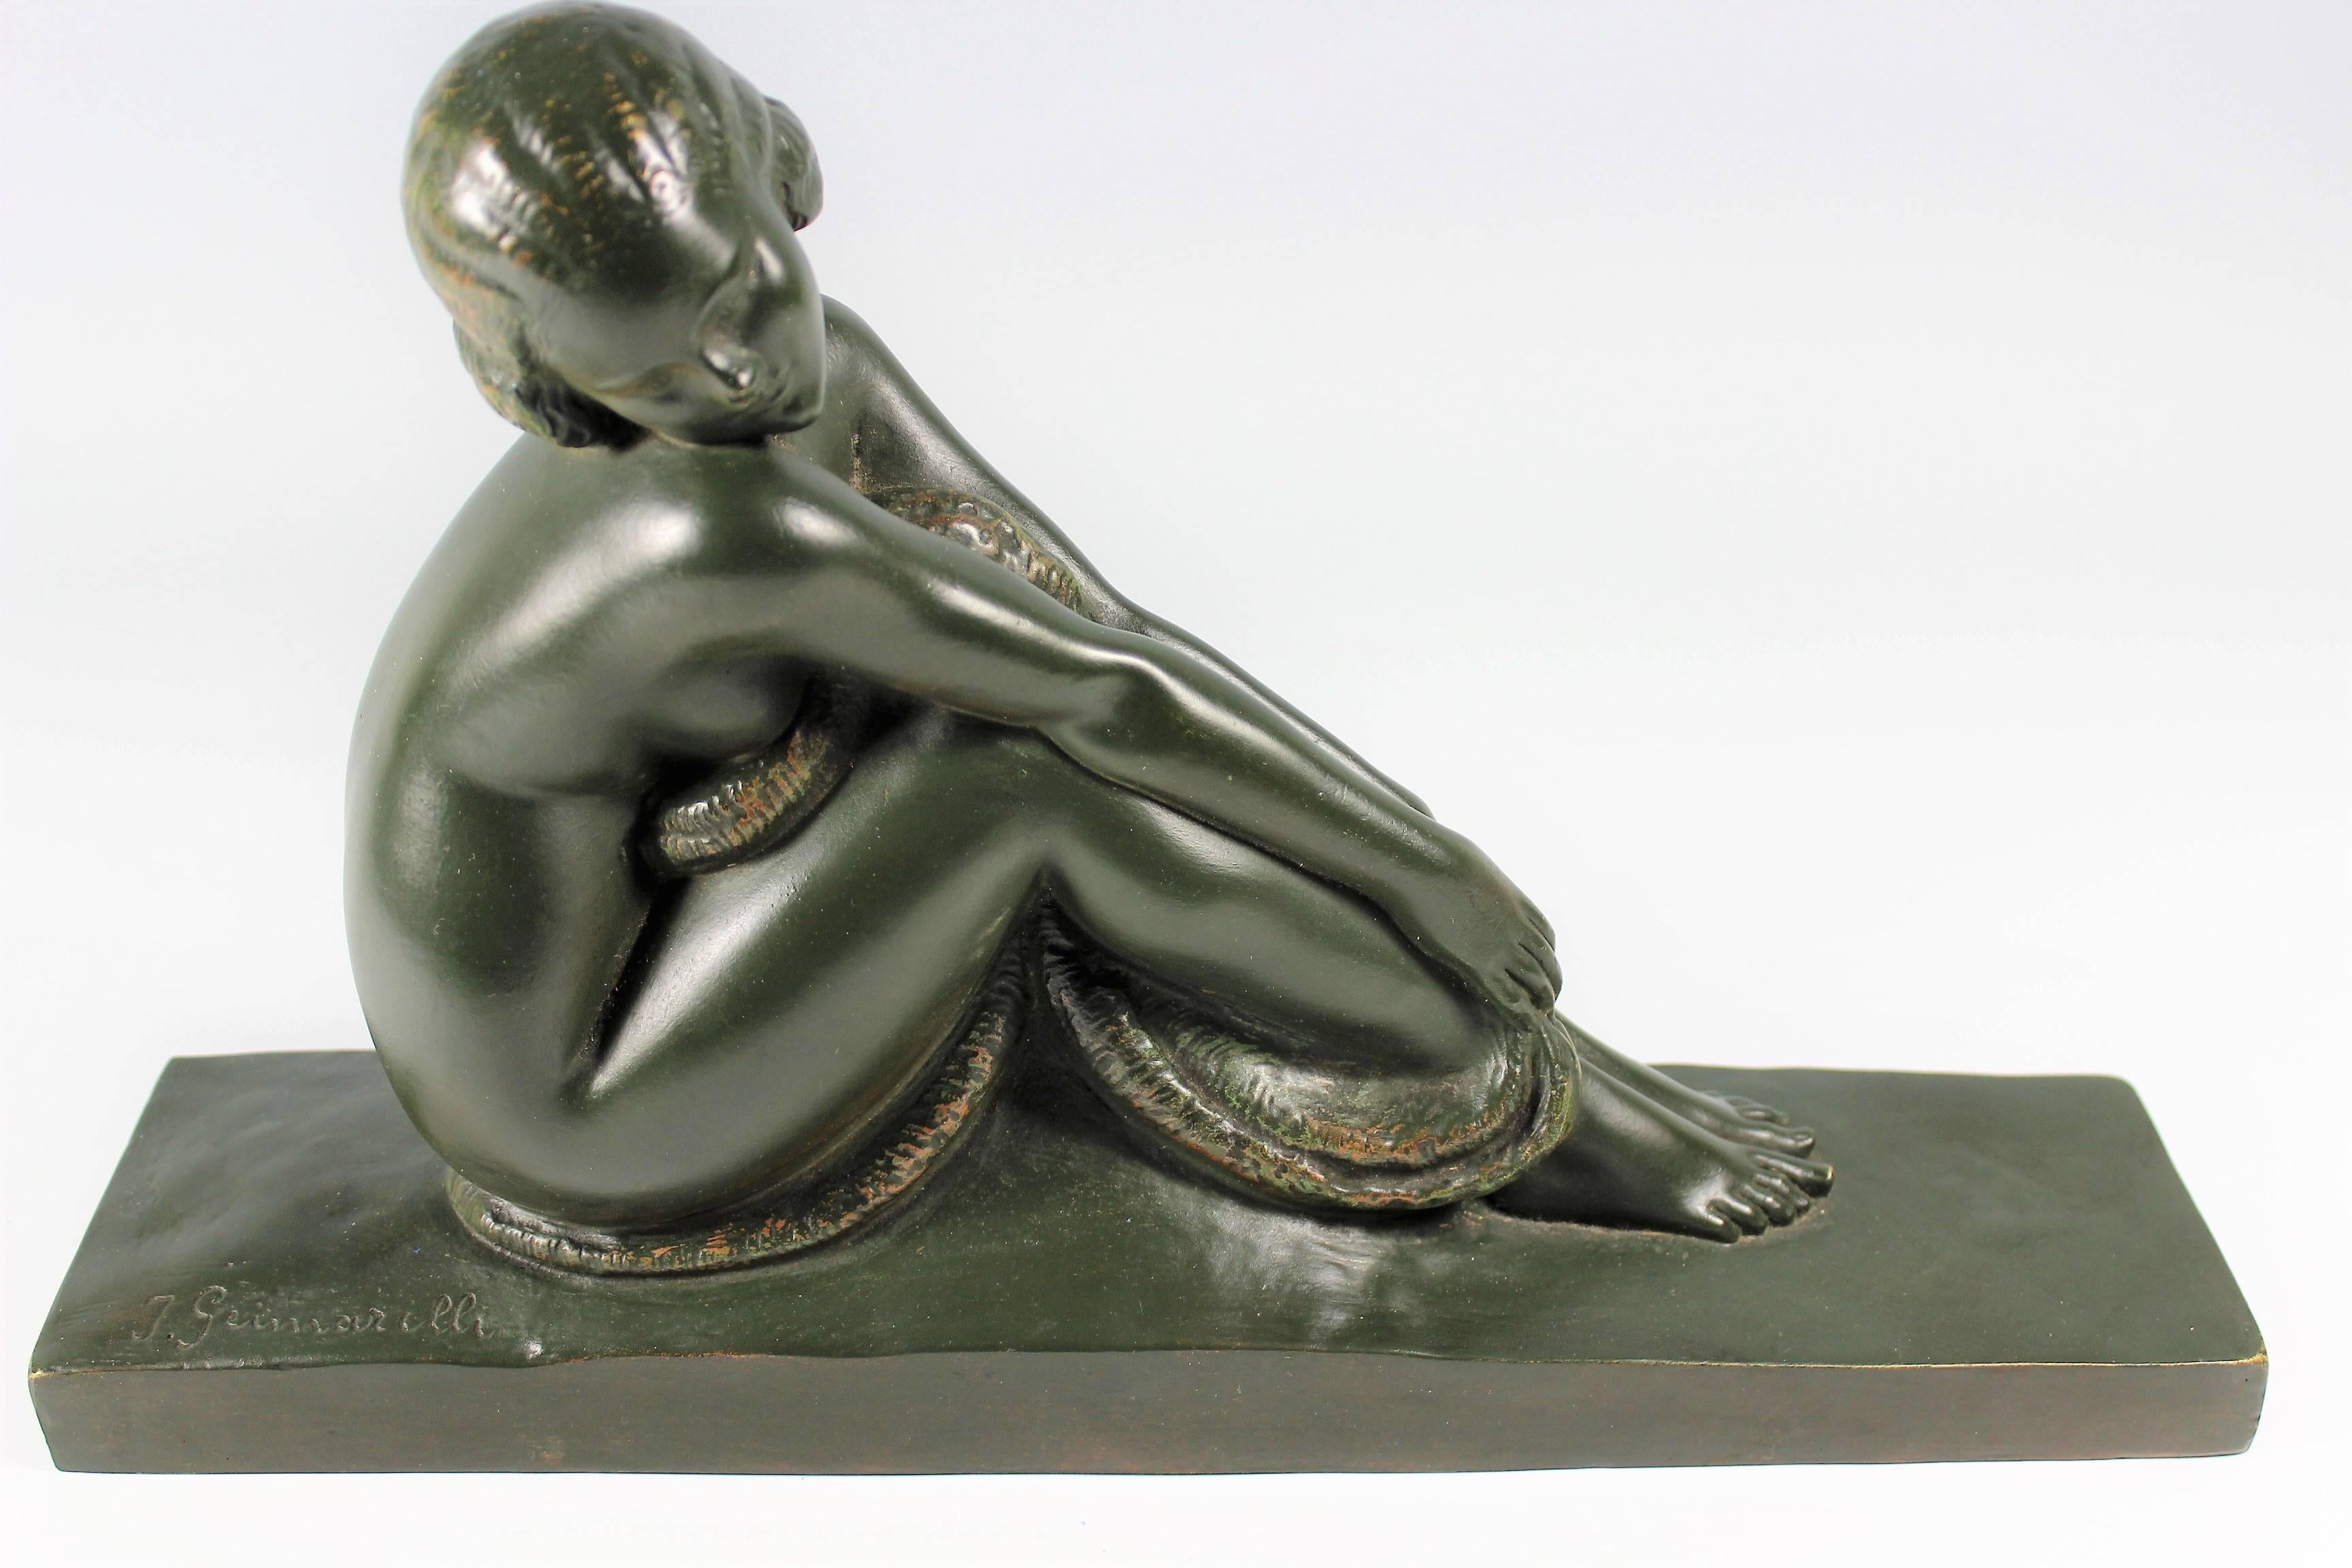 An original patinated bronze nude by Amedeo Gennarelli, circa 1925. This demure young nude model, depicted seated with knees raised and her head resting on her shoulder. A deep green patina signed in the cast ‘A.Genneralli’.

Amedeo Gennarelli